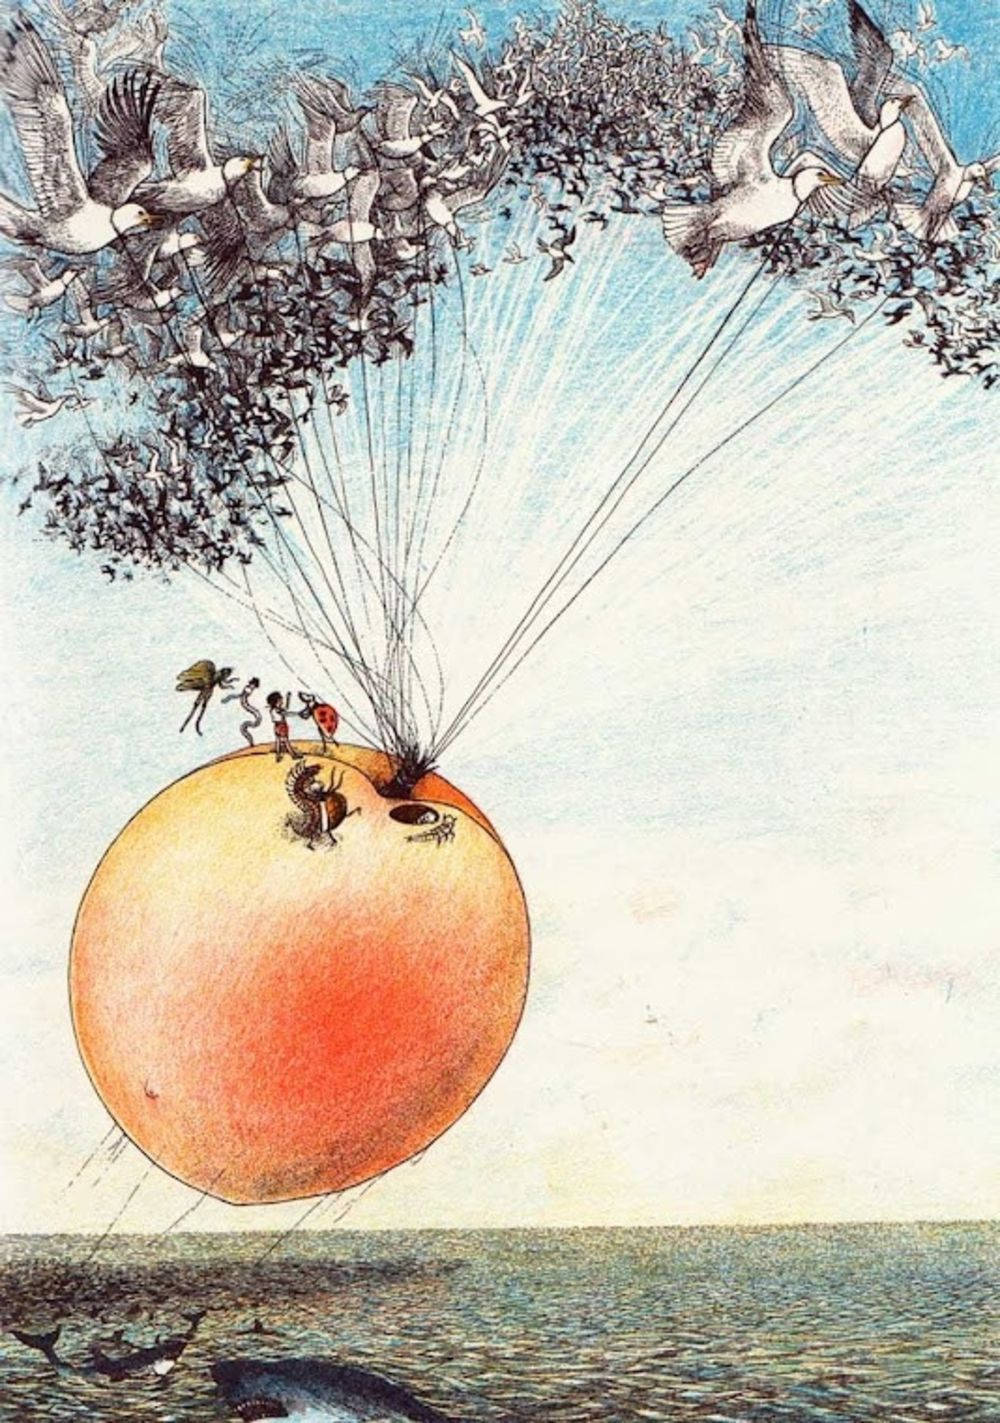 James And The Giant Peach Seagulls